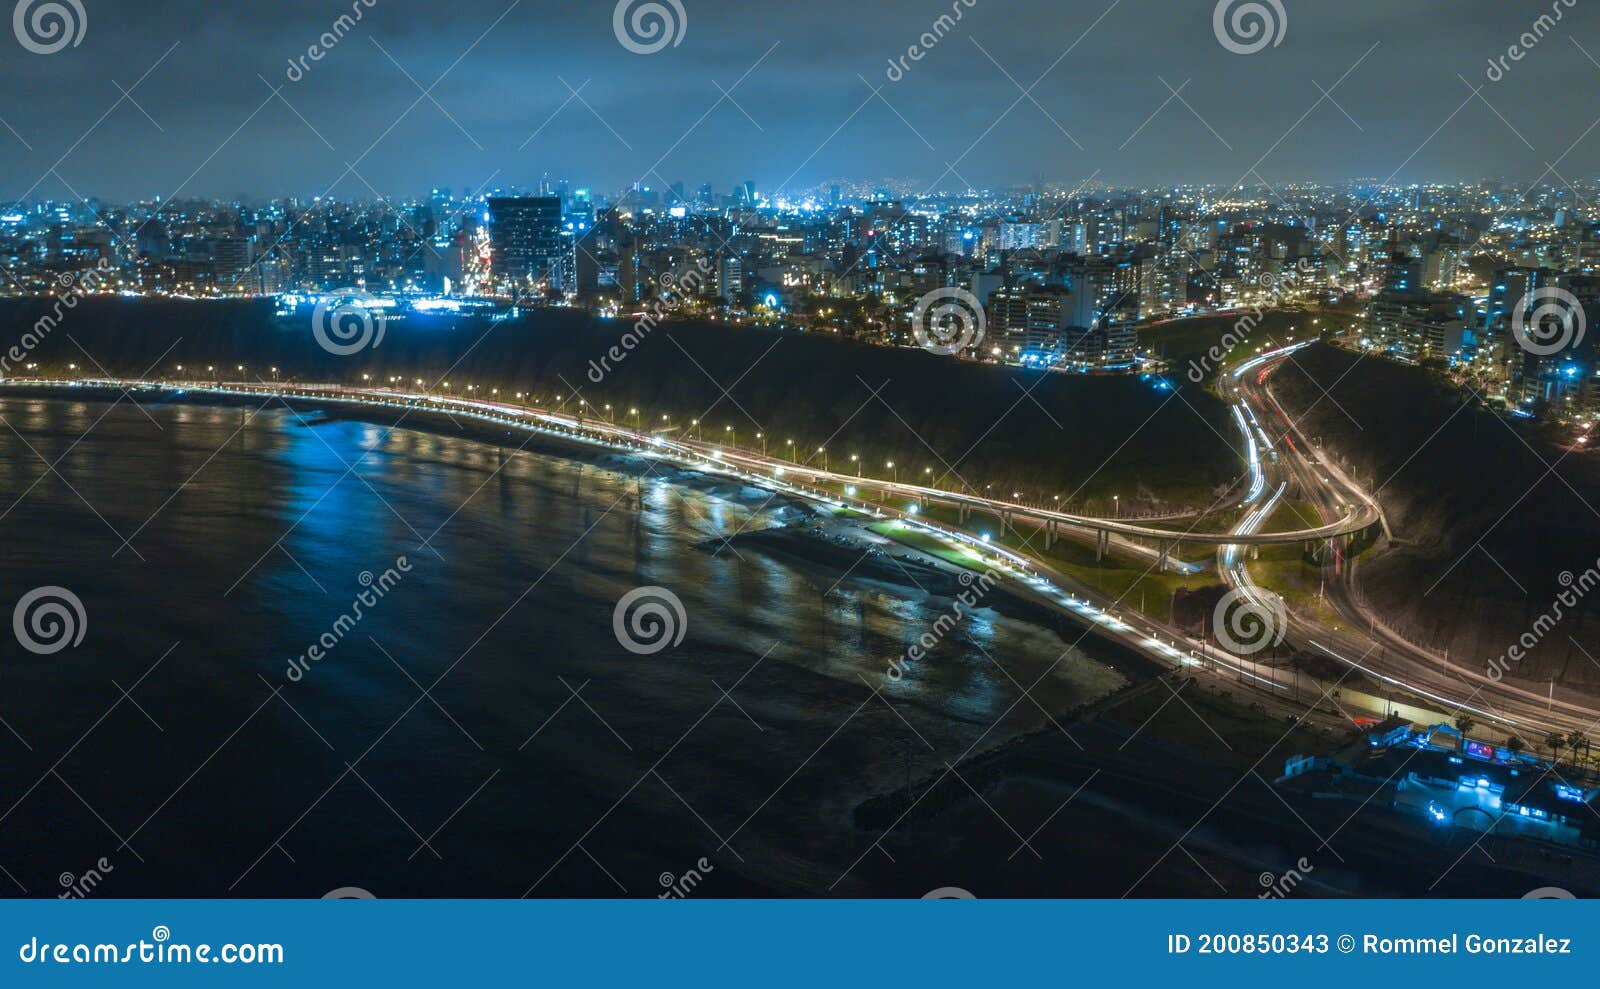 night panoramic view of the costa verde high way and costanera at the sunset, san miguel - lima, peru.